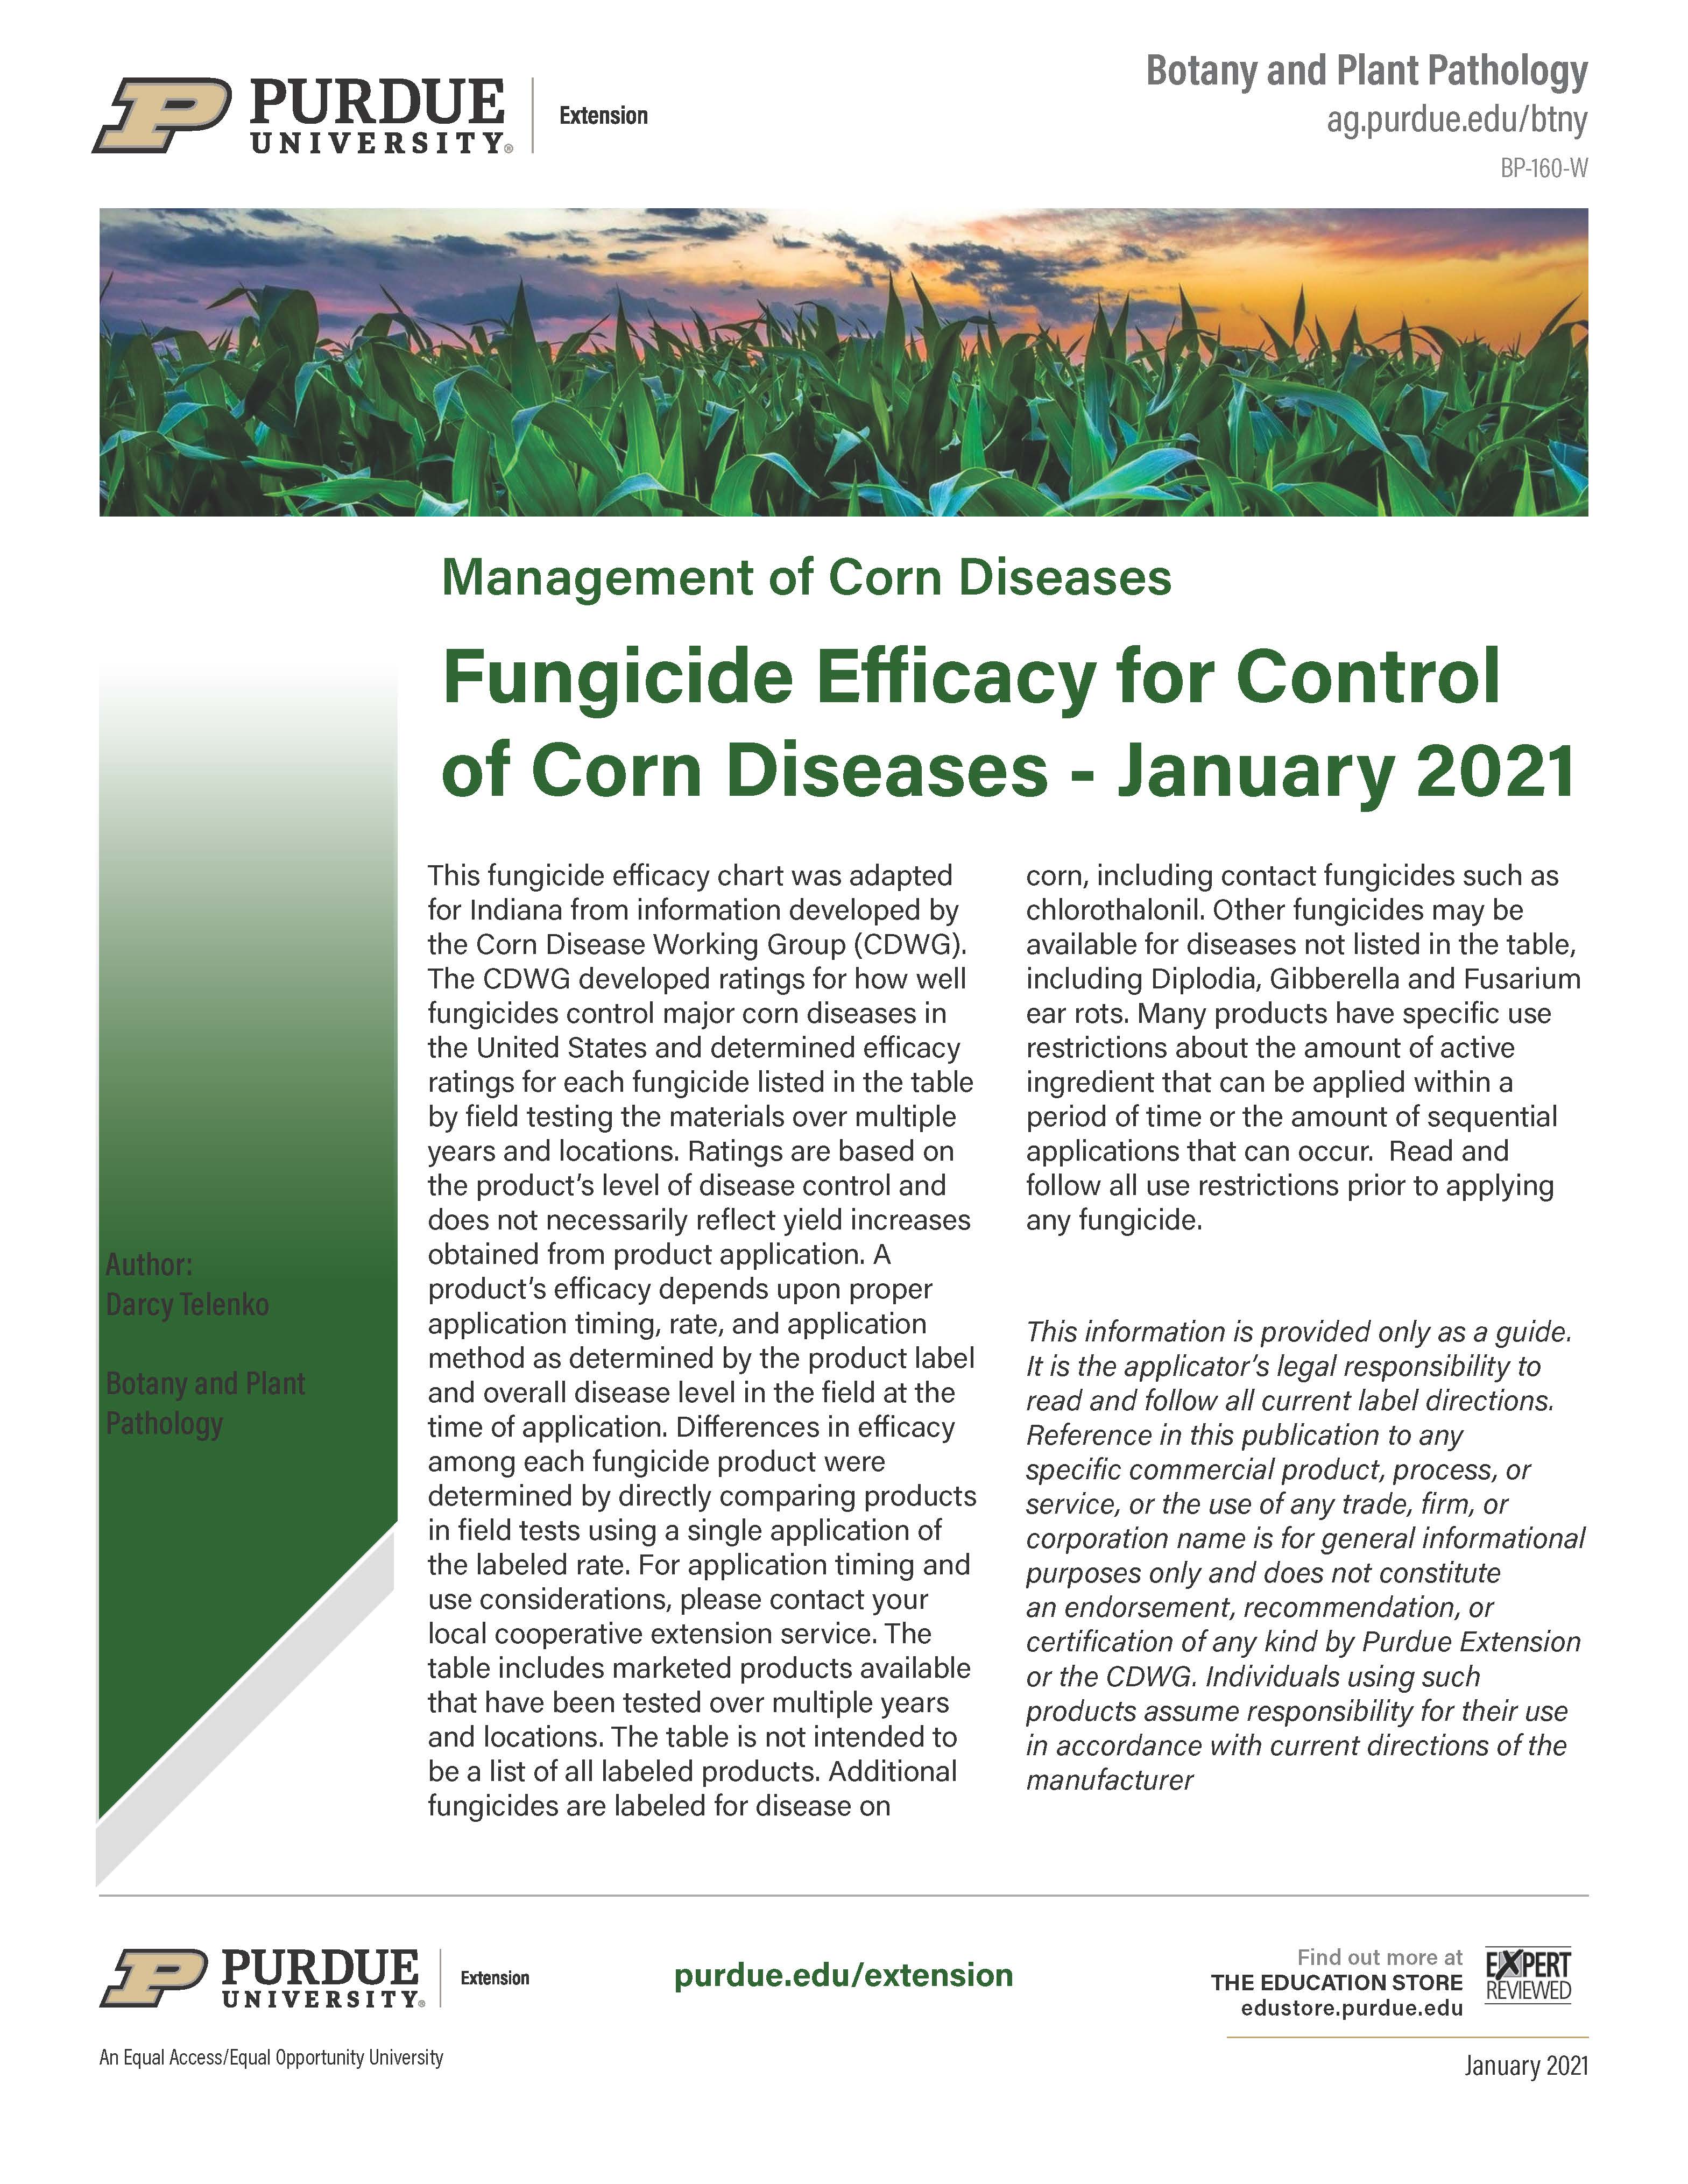 Diseases of Corn: Fungicide Efficacy for Control of Corn Diseases 